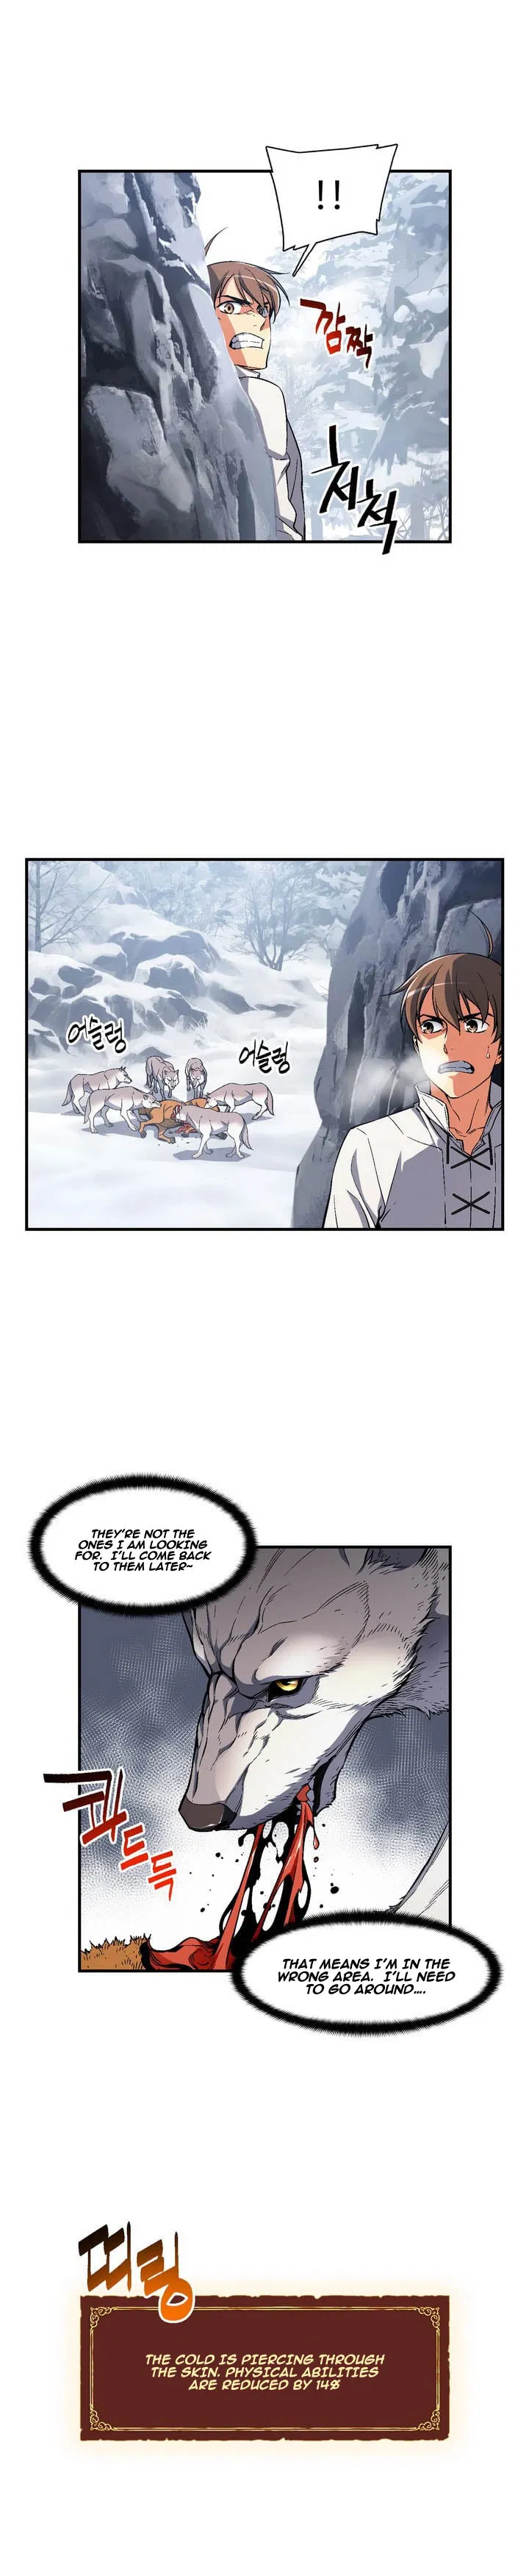 The Legendary Moonlight Sculptor Chapter 74 page 8